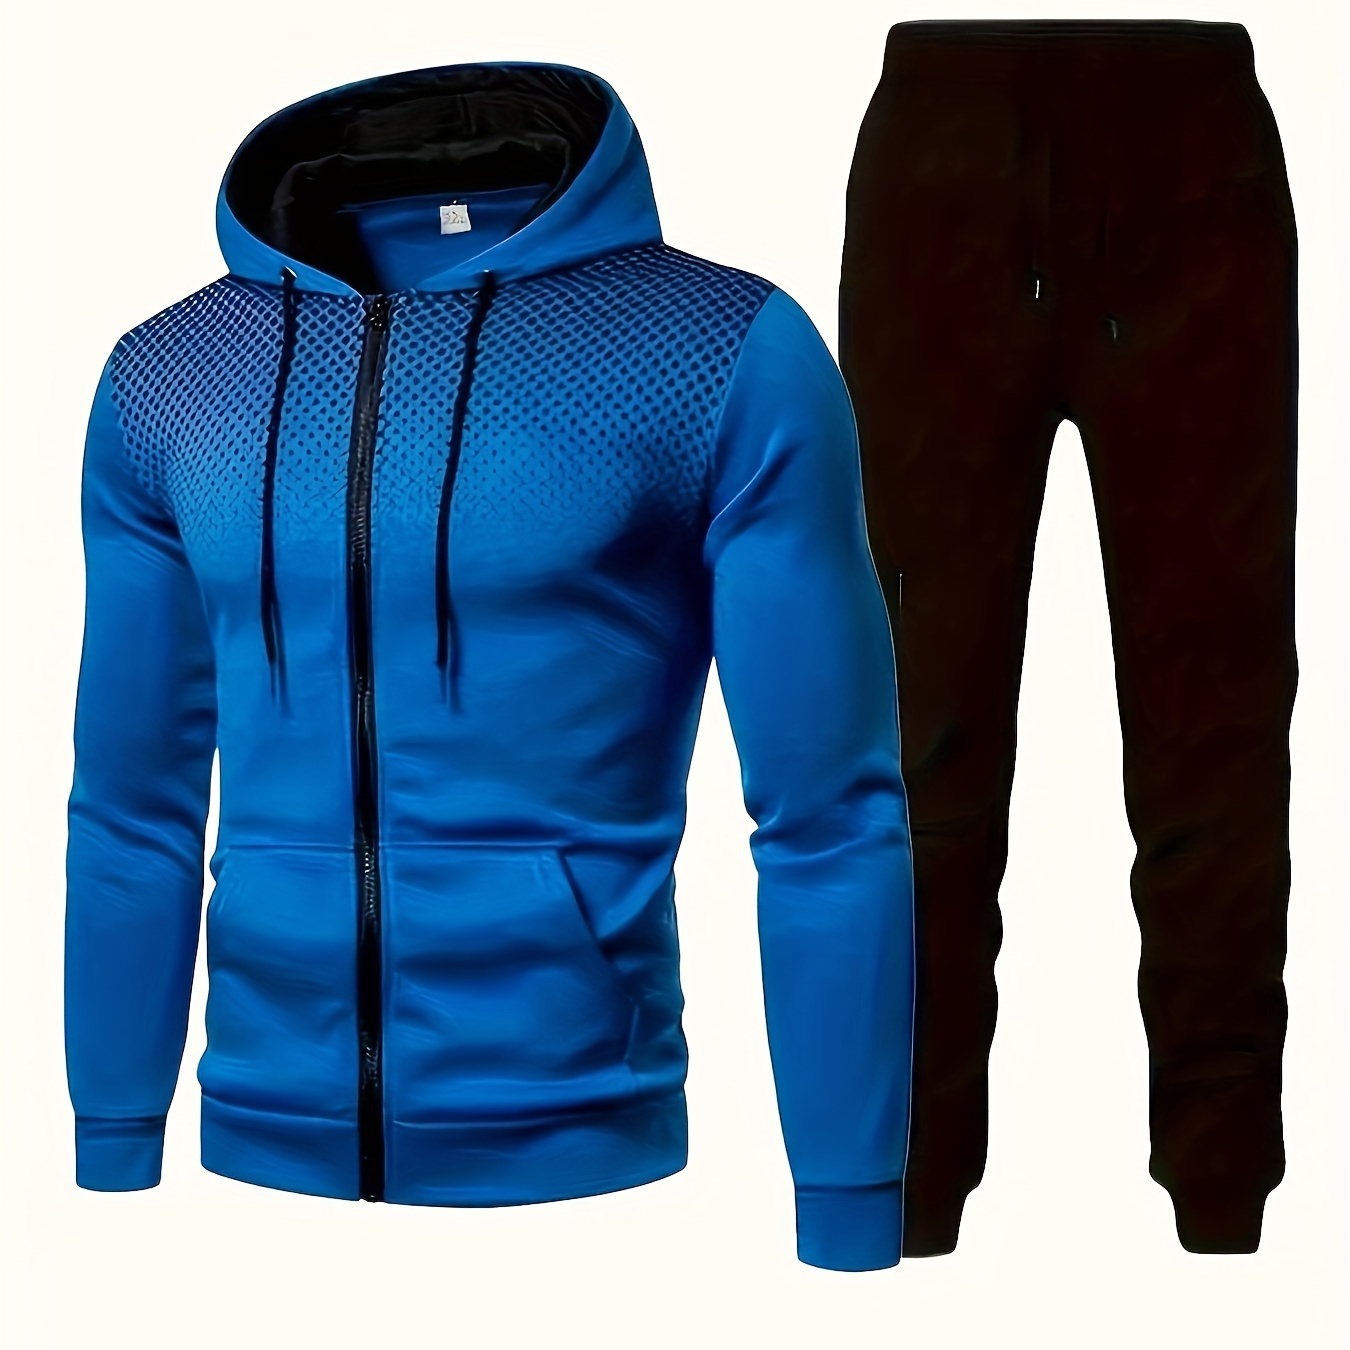 

Classic Men's Athletic 2pcs Tracksuit Set Casual Full-zip Sweatsuits Long Sleeve Hoodie And Jogging Pants Set For Gym Workout Running